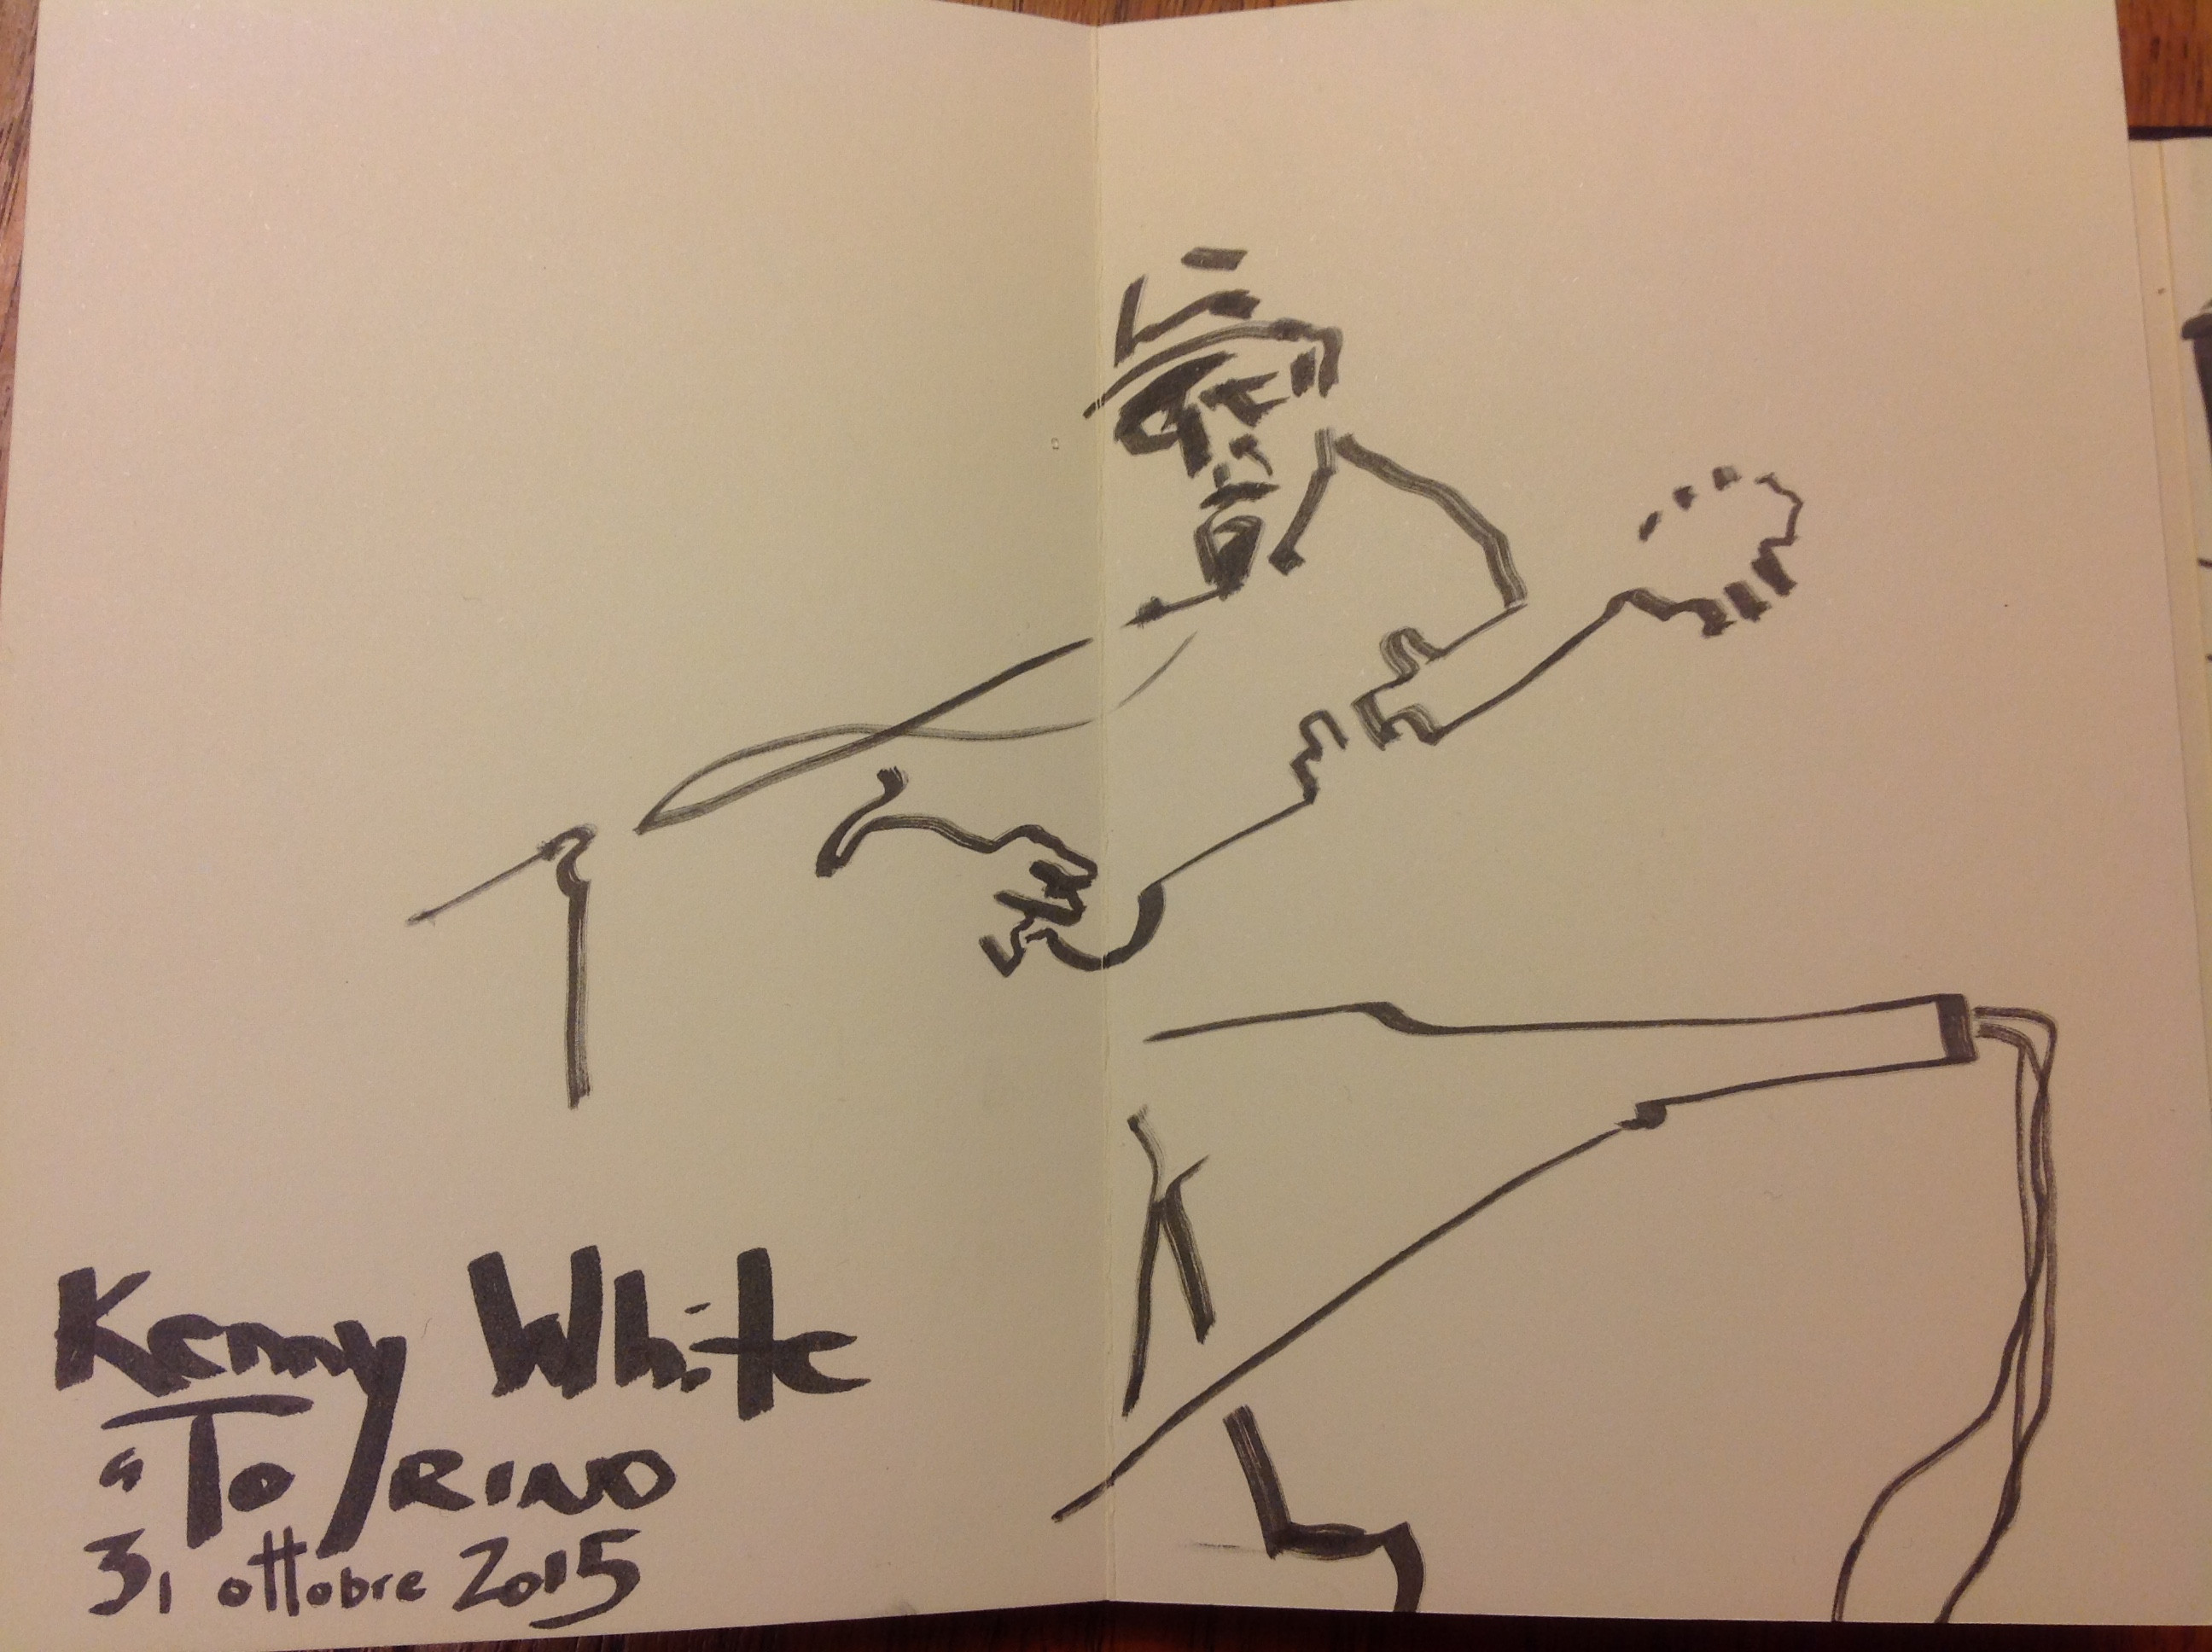 Kenny White in Turin